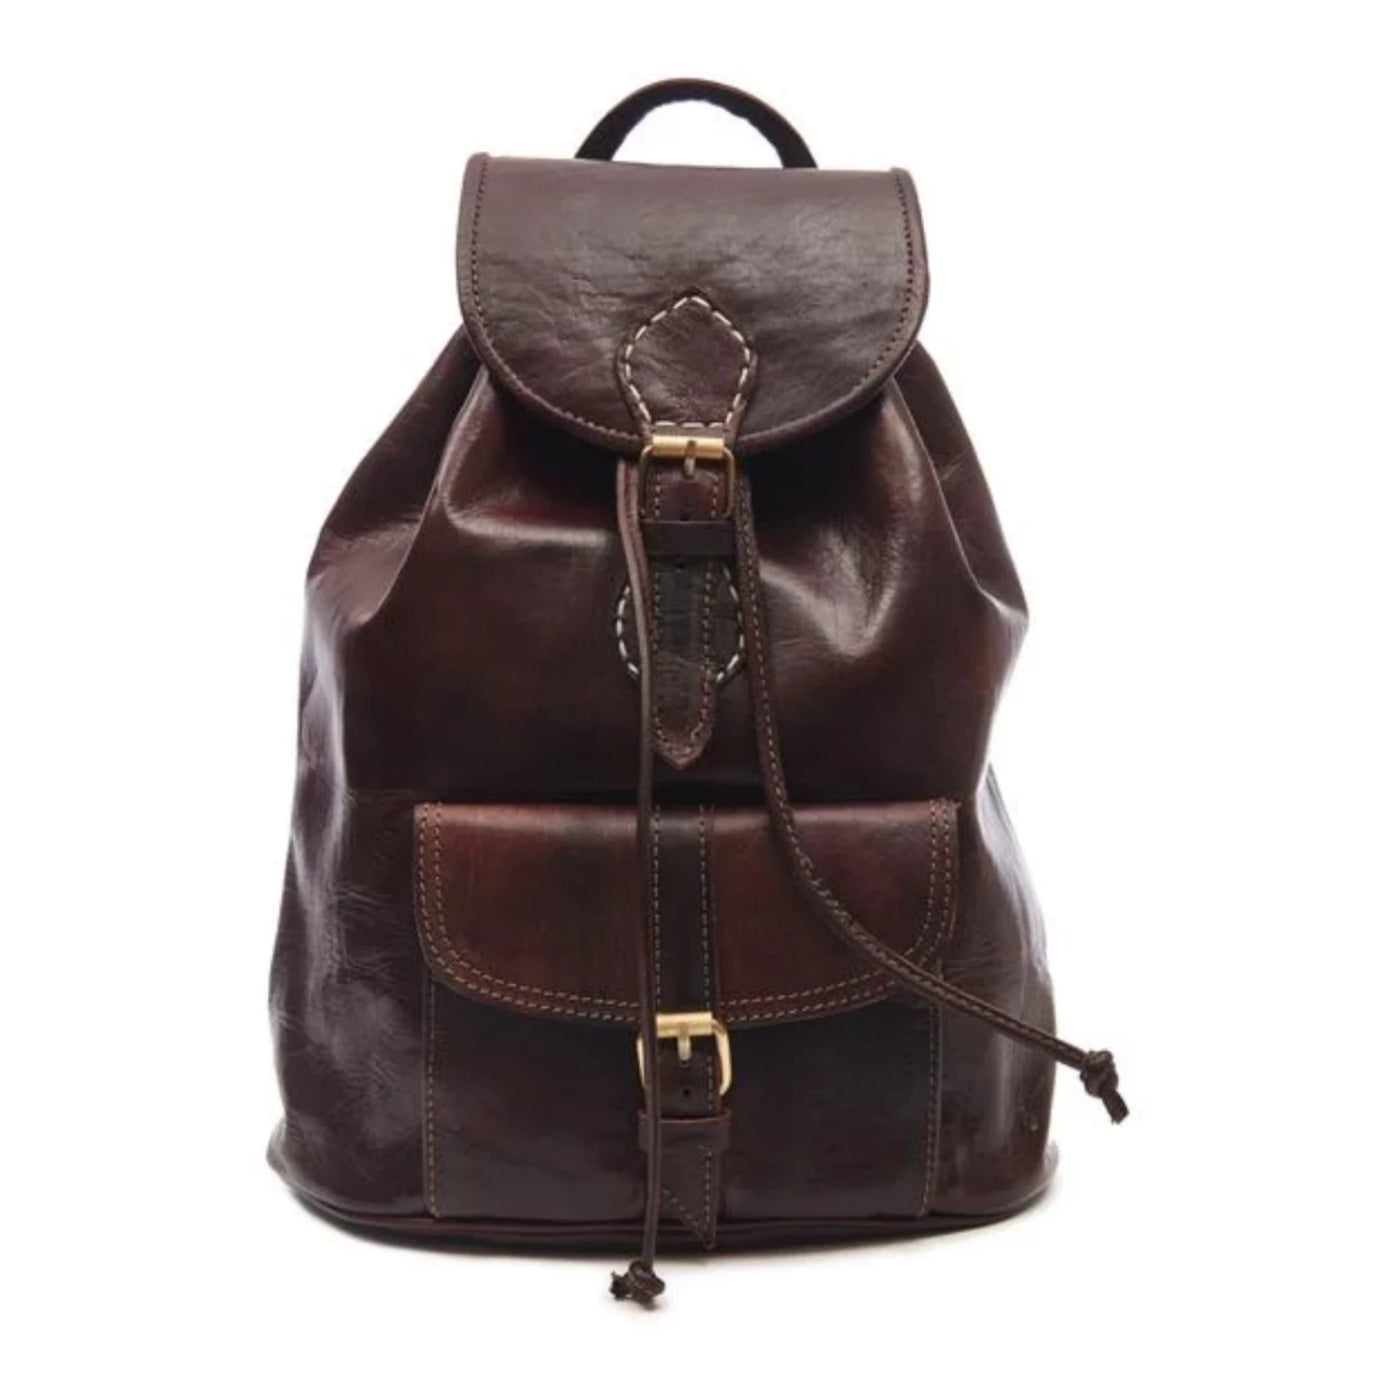 Small Sac a Dos Backpack - Chocolate-ISMAD LONDON